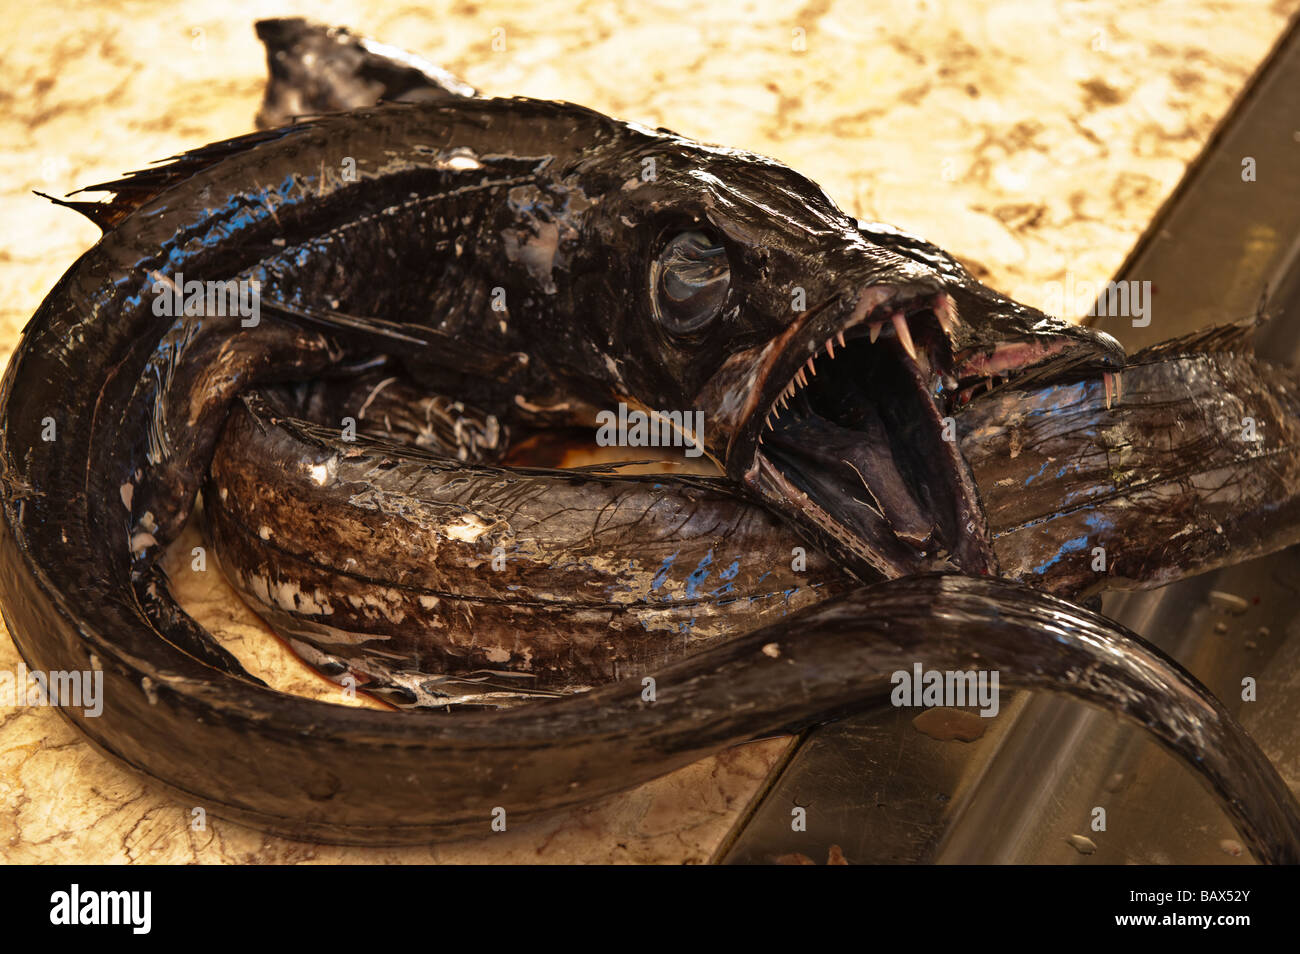 A Scabbard fish for sale at a fish market Stock Photo